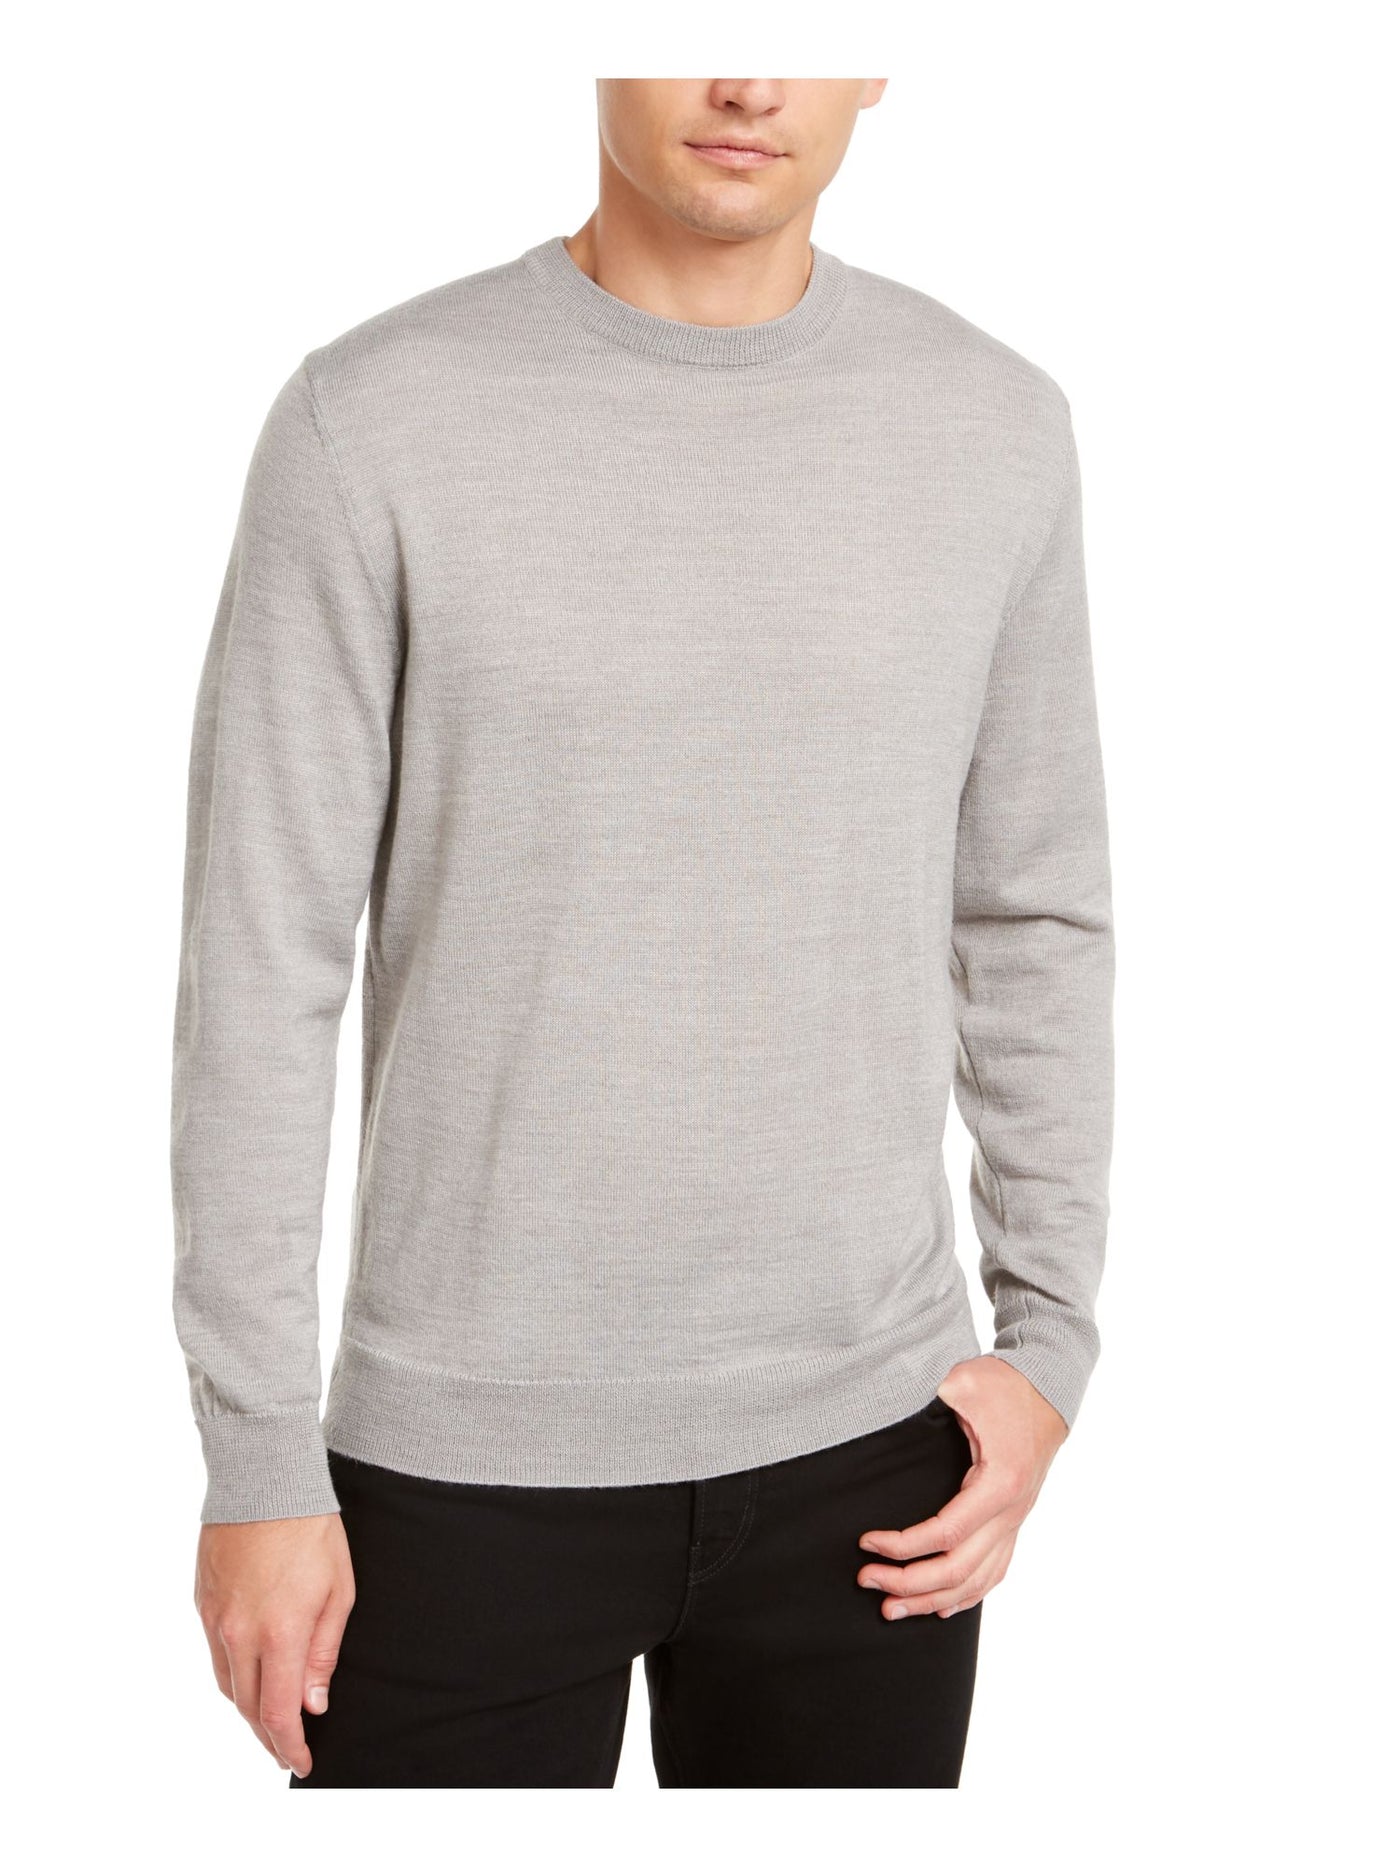 CLUBROOM Mens Gray Long Sleeve Crew Neck Classic Fit Cotton Pullover Sweater XXL